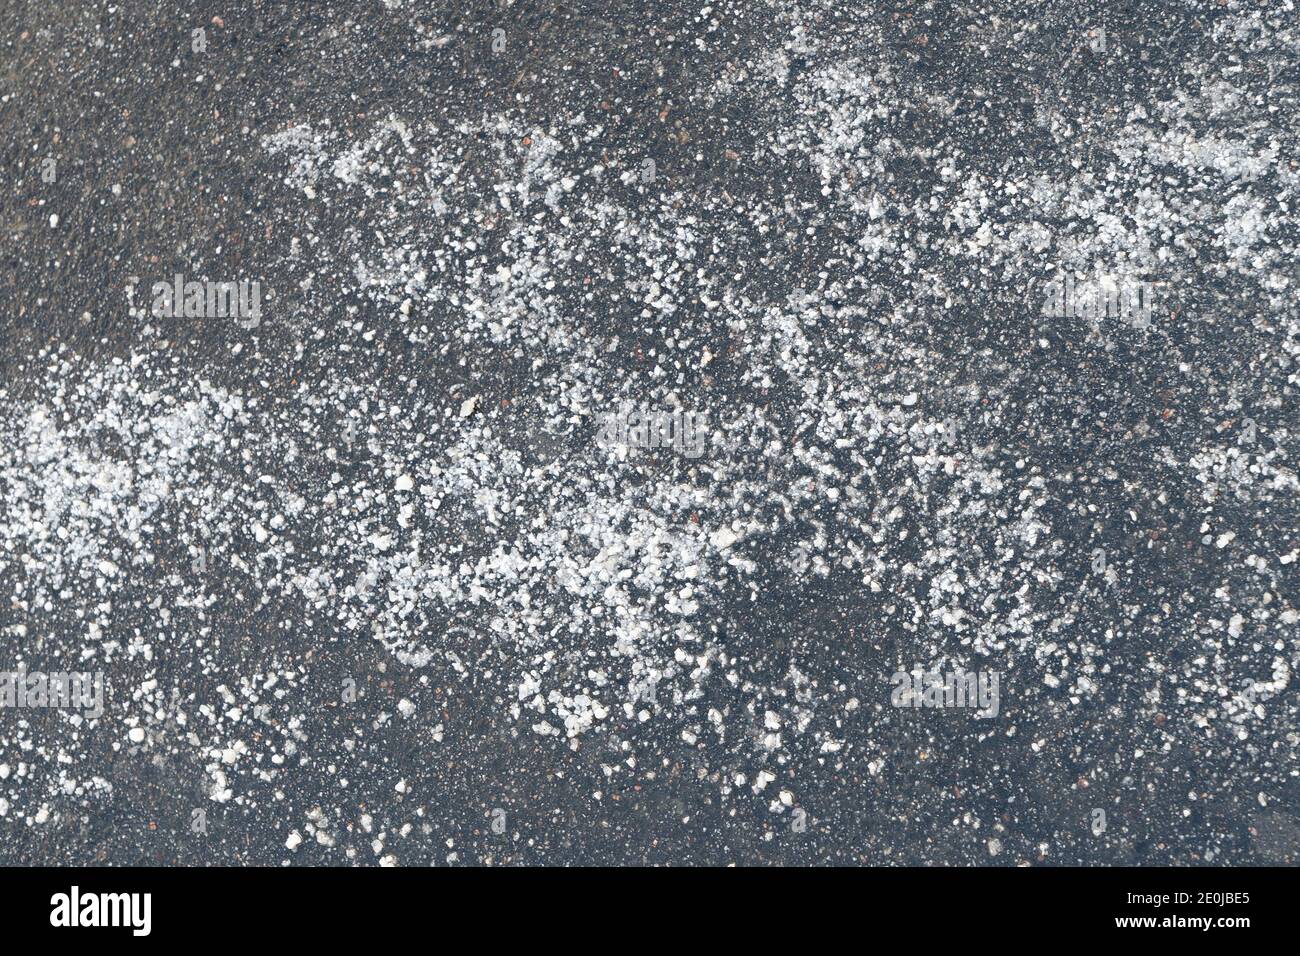 De-icing chemicals reagent on asphalt road. Pavement is sprinkled with technical salt will make the road safe, top view. Stock Photo